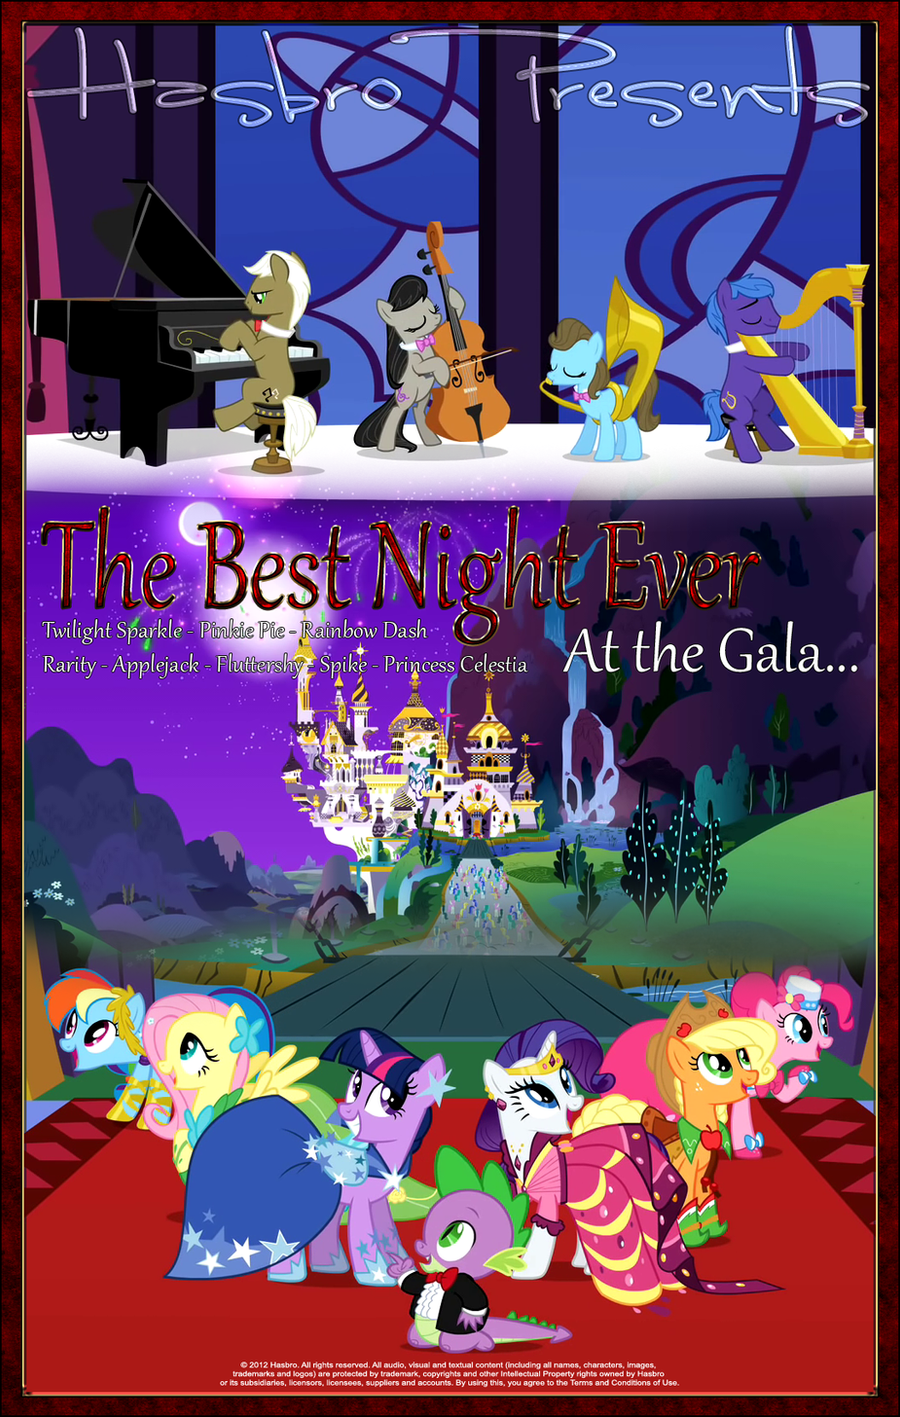 mlp___the_best_night_ever___movie_poster_by_pims1978-d563fwg.png